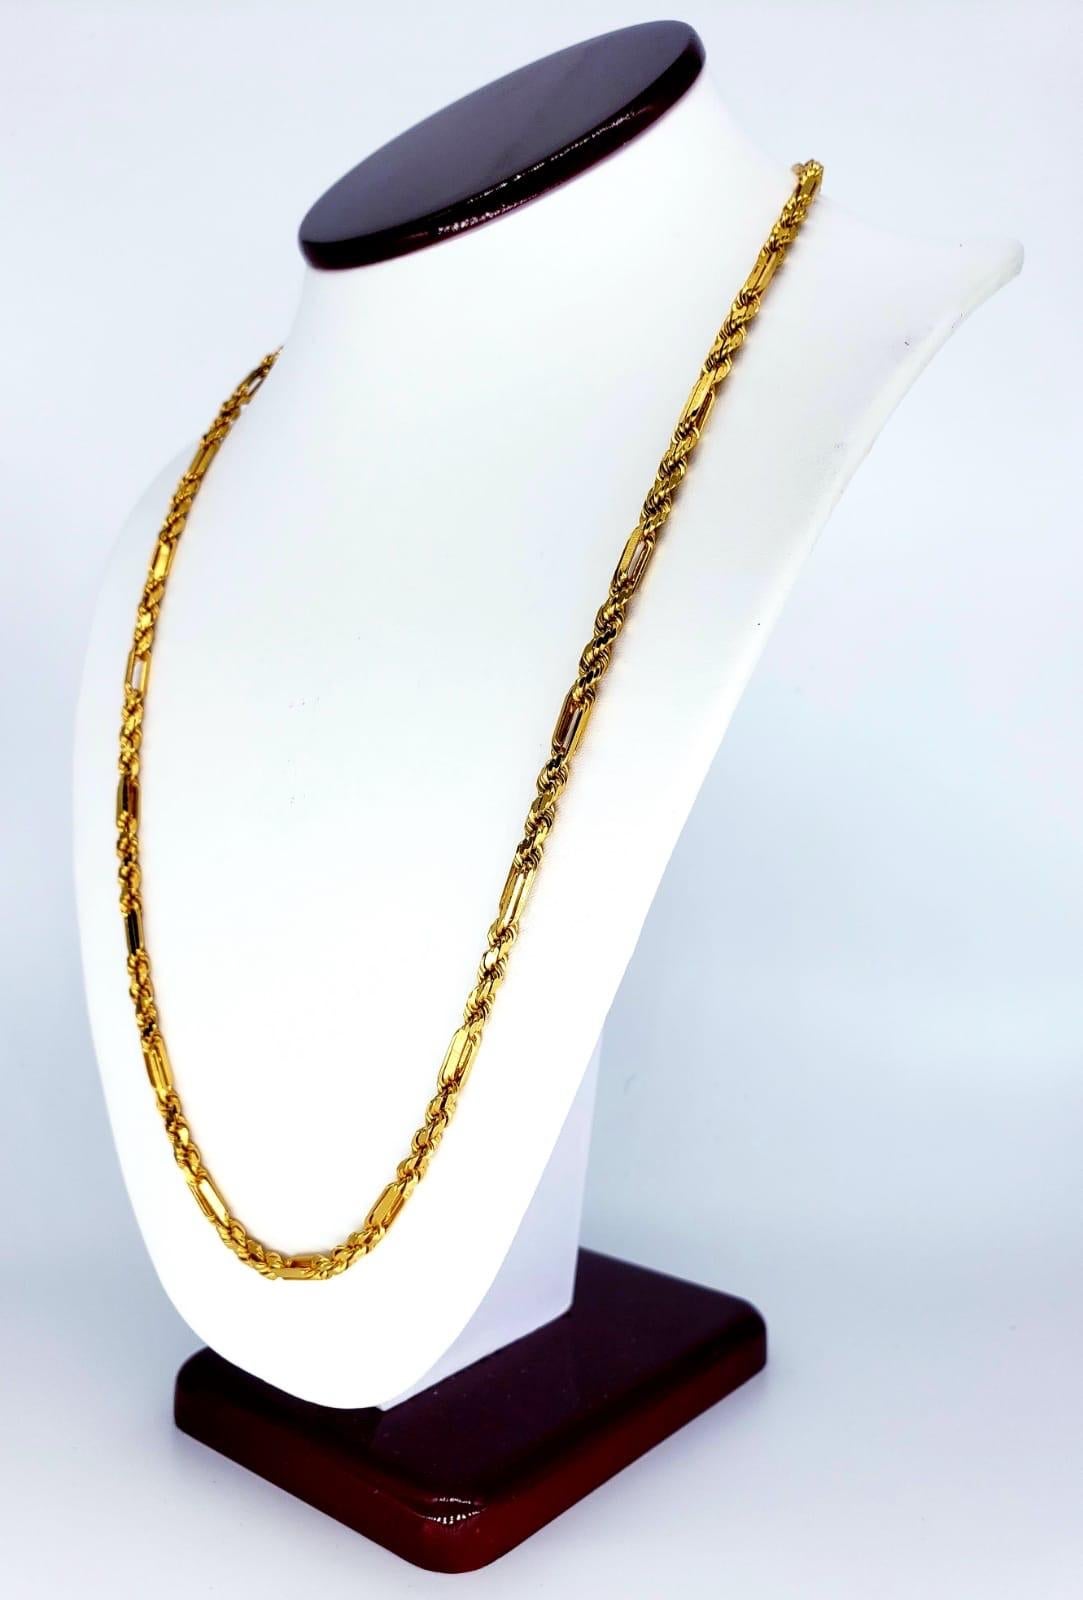 Rate Heavy Fancy Rope Link Chain 22k Gold 24 Inches. The necklace is very shiny with the fancy look. The necklace weights 48.5 grams solid 22k gold and is 4.20mm wide. This chain is a very luxury piece.